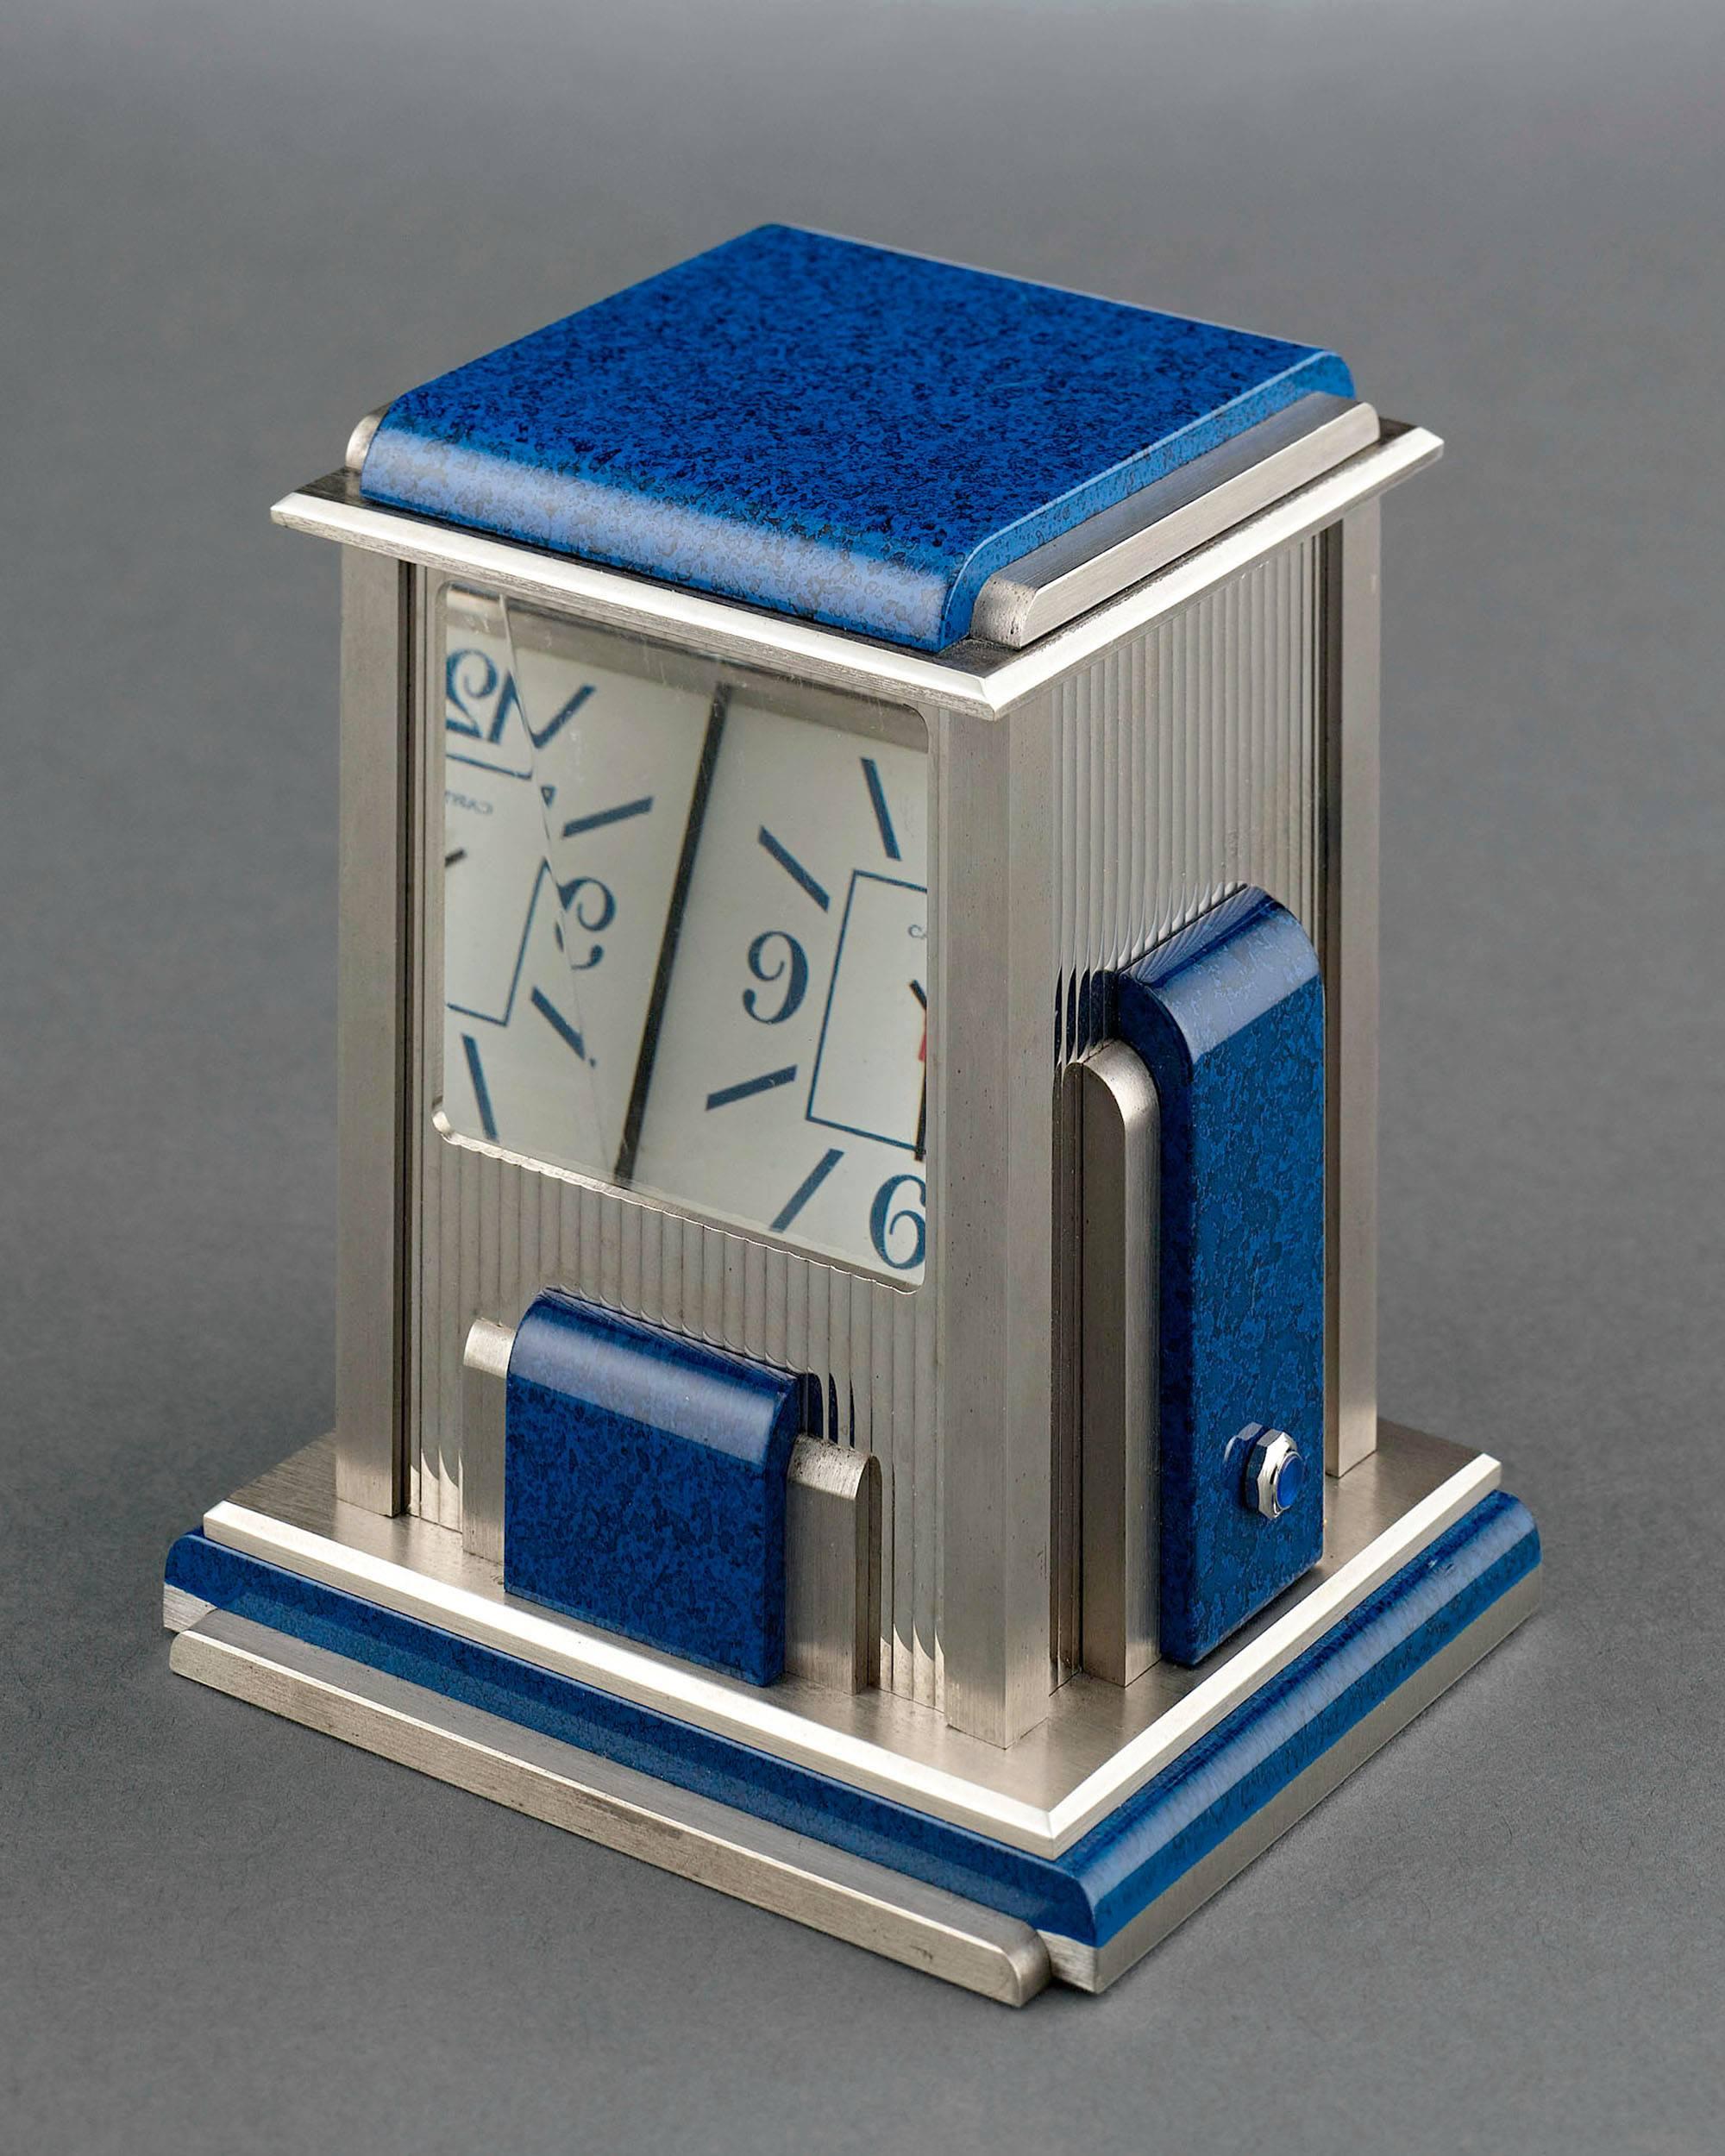 This mystery clock by Cartier, known as a “prism” clock, is a work of exceptional engineering and stylish artistry. Crafted in a sleek Art Deco style with lapis lazuli accents, this prism clock is silver-plated and fitted with quartz crystal prisms